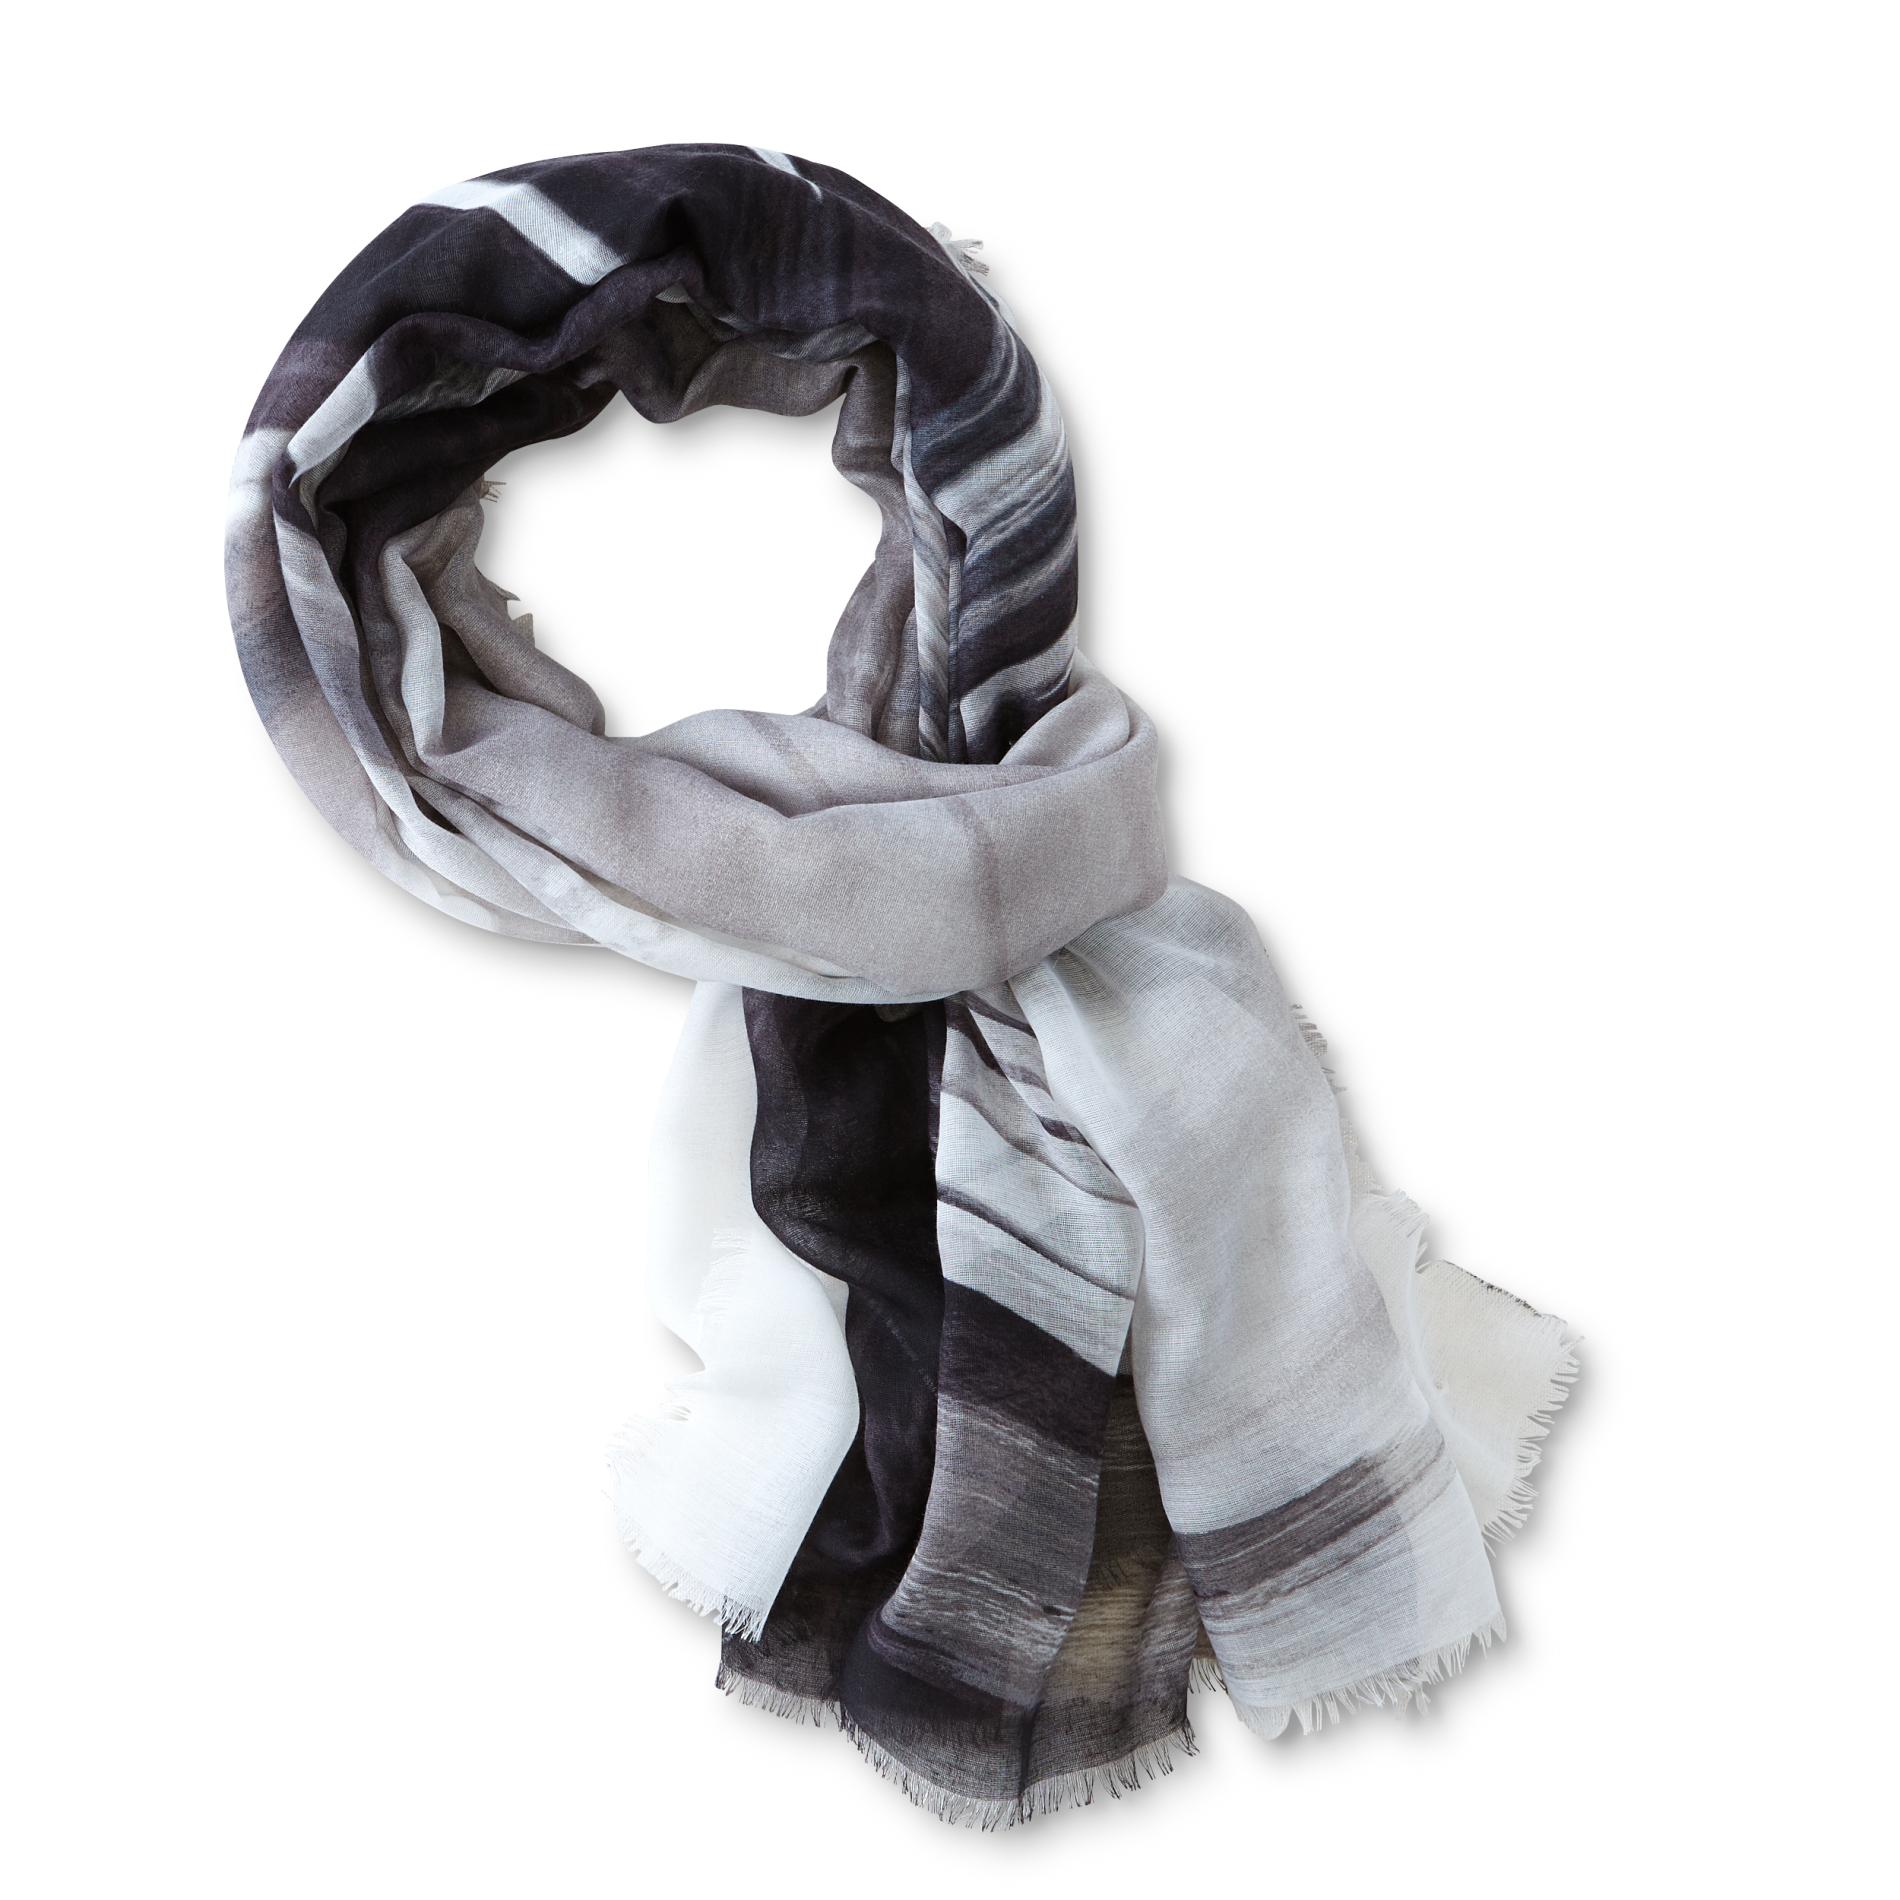 Women's Printed Fashion Scarf - Abstract